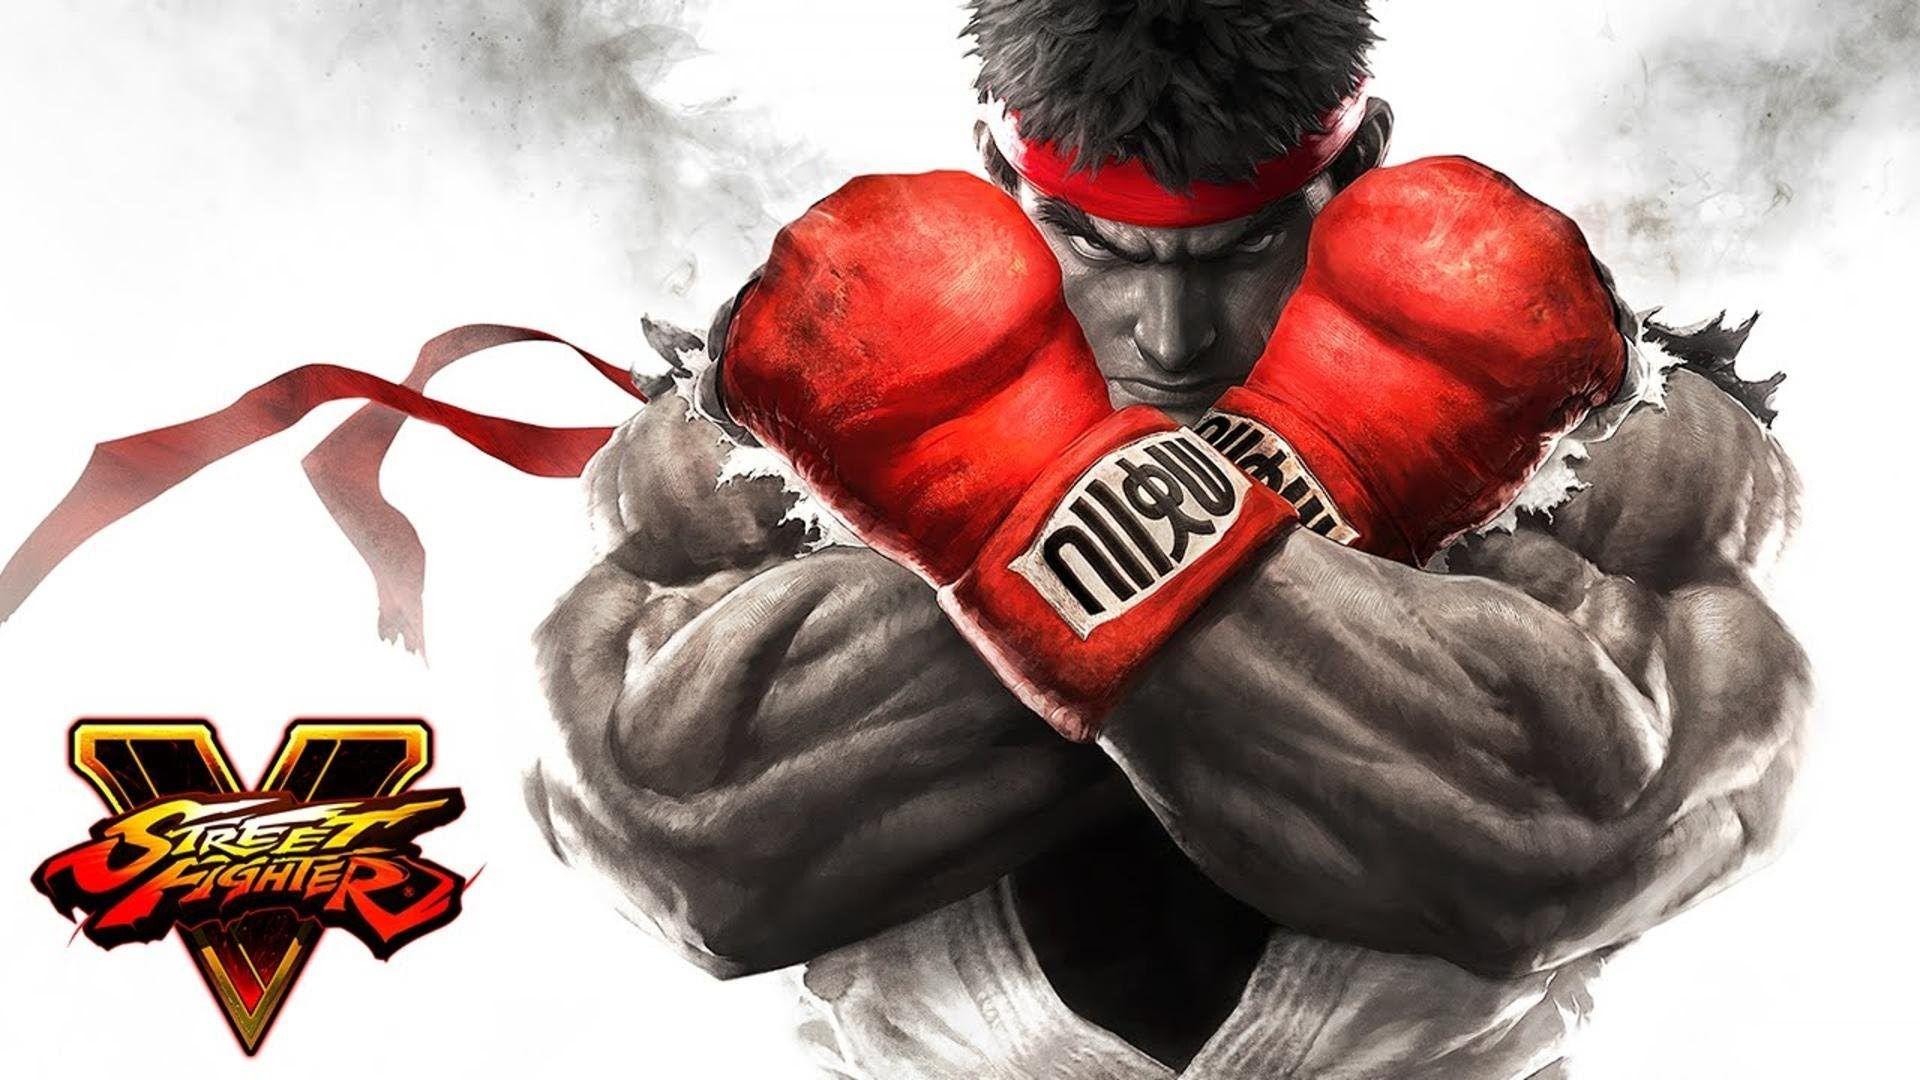 Super Street Fighter V will be a free expansion